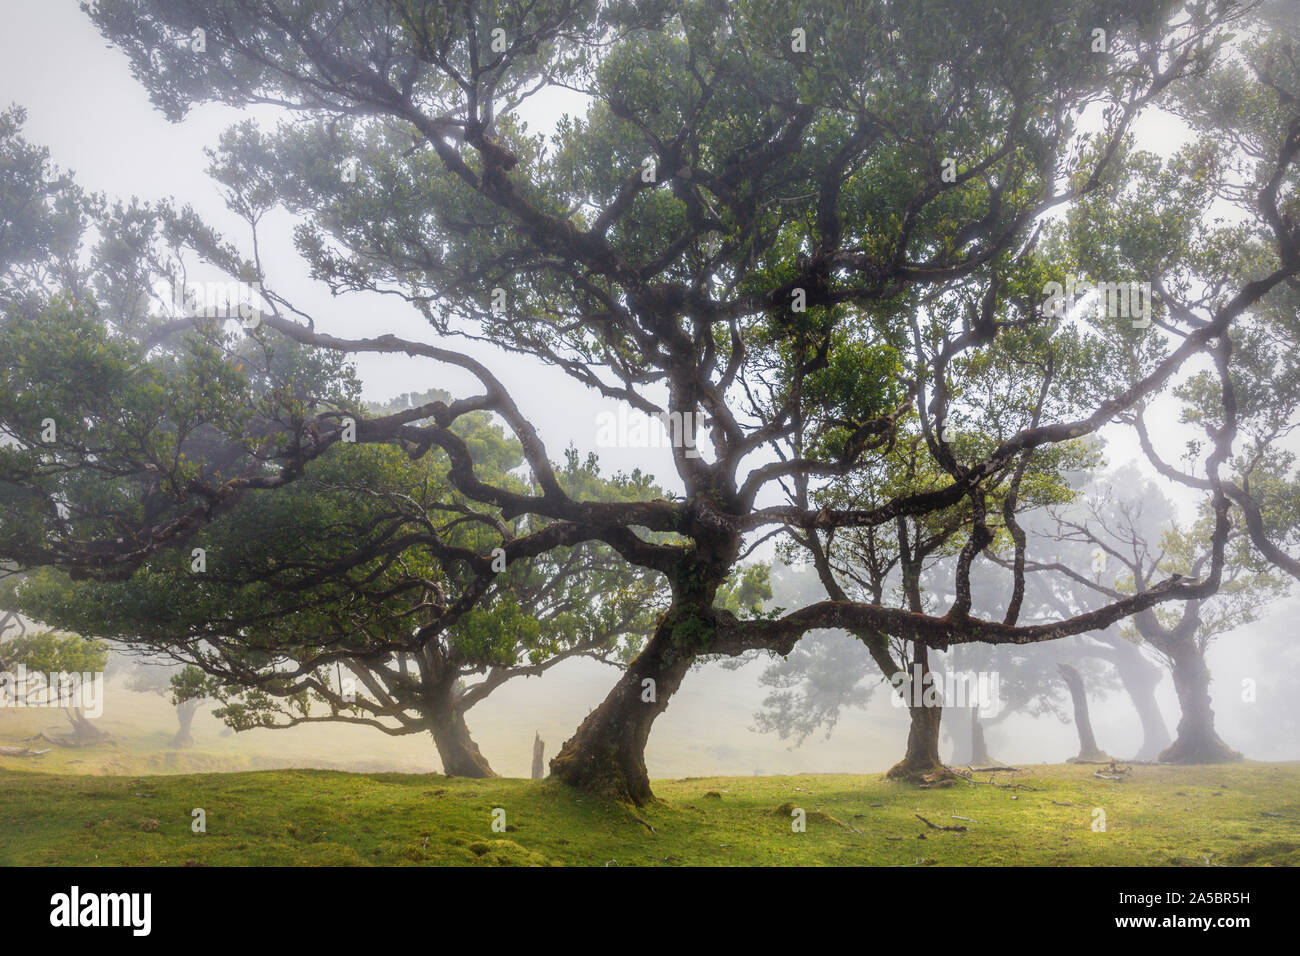 Ancient laurel forest in mountain mist, Fanal, Madeira. UNESCO World Heritage Site Stock Photo